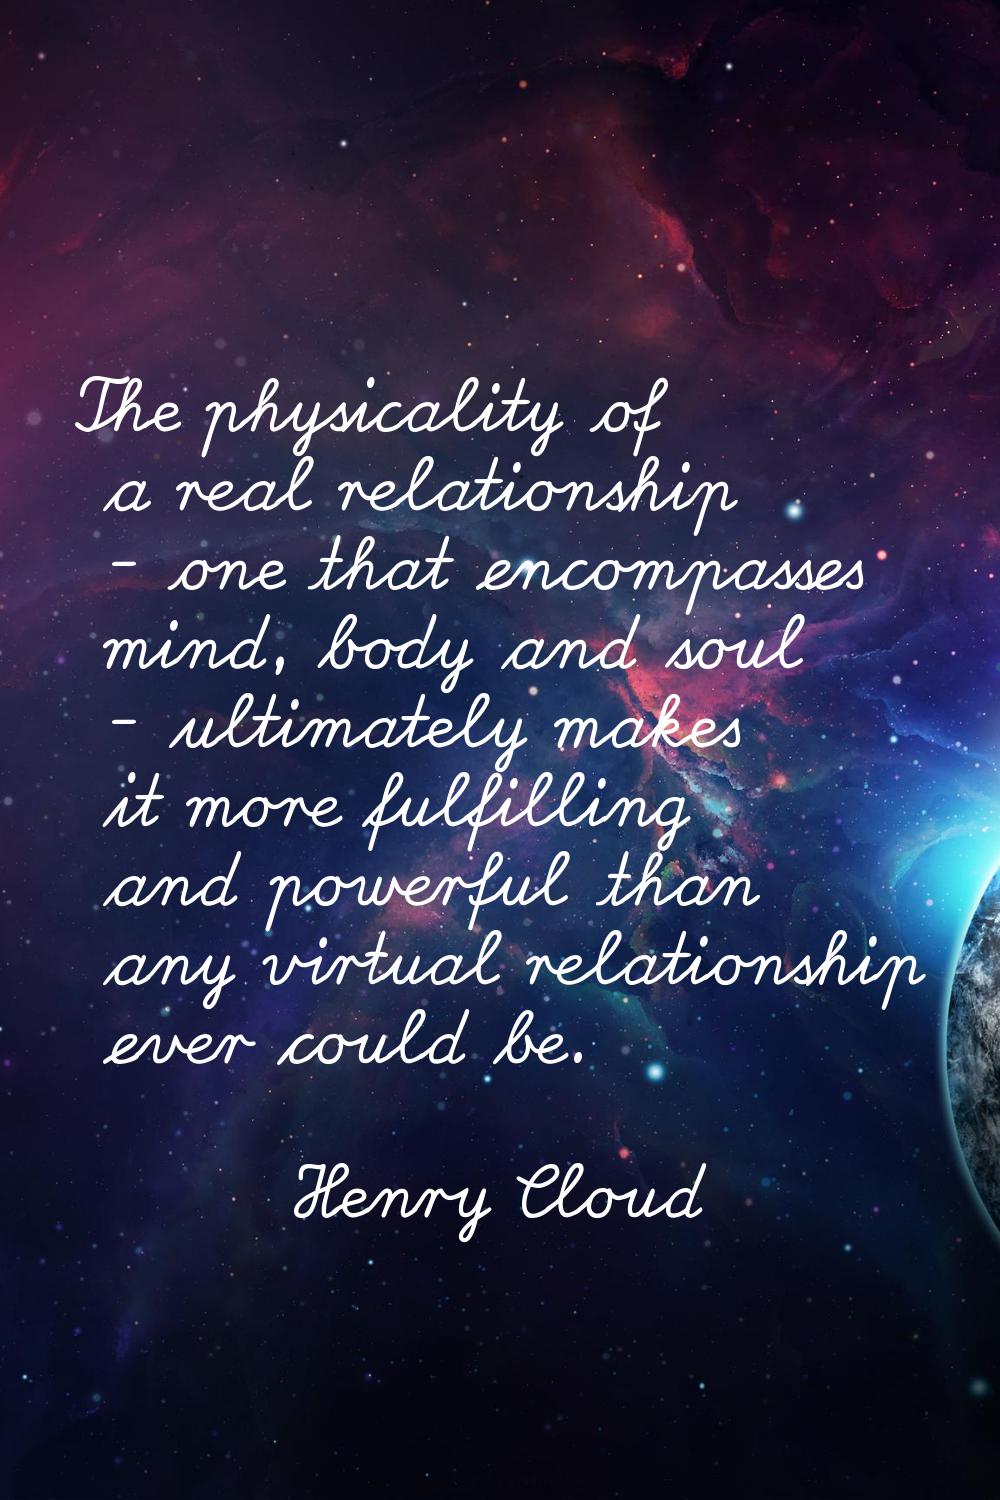 The physicality of a real relationship - one that encompasses mind, body and soul - ultimately make